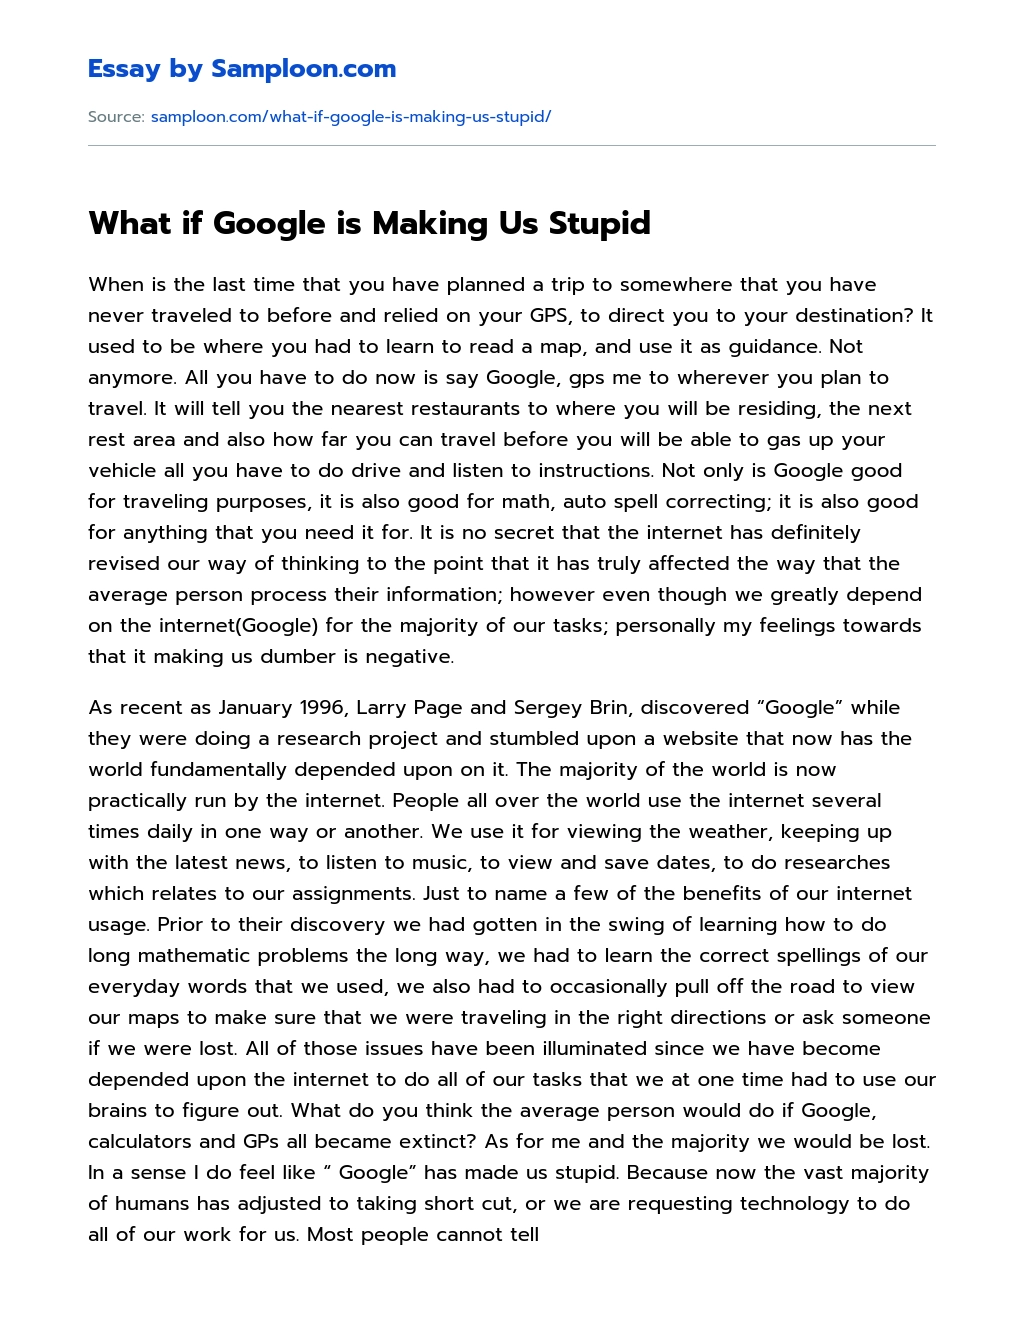 What if Google is Making Us Stupid essay